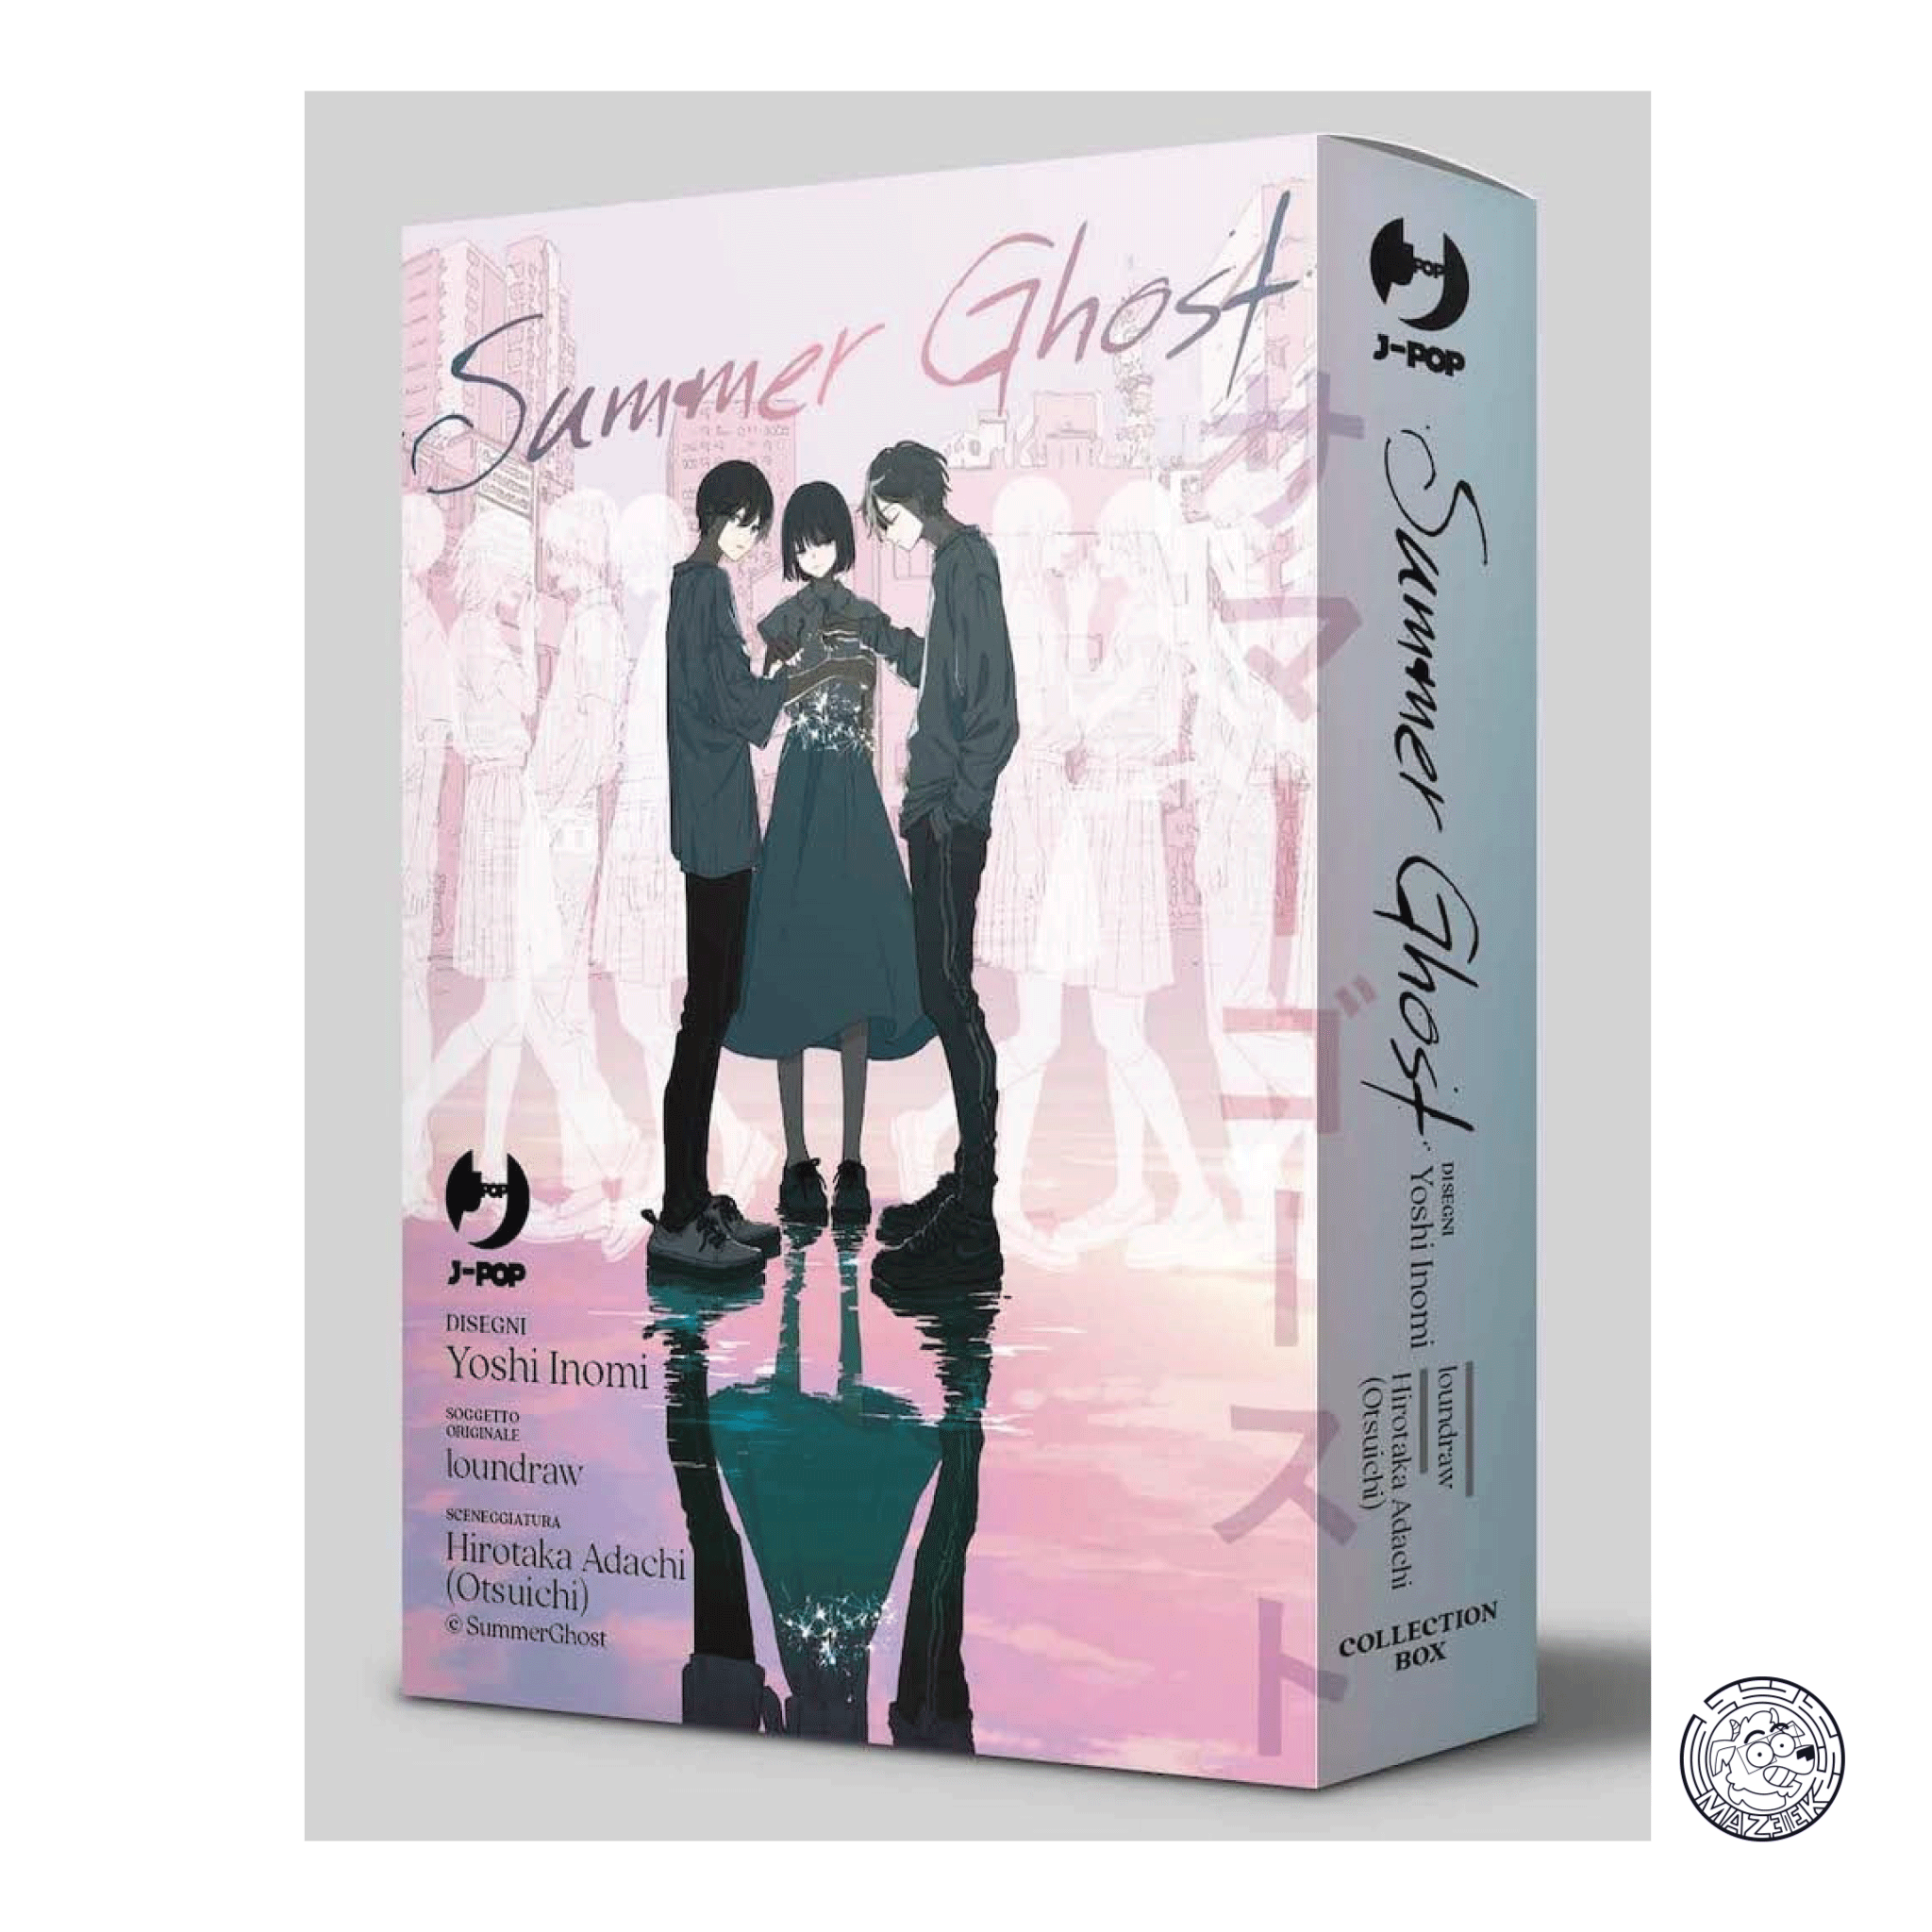 Summer Ghost - Box Completo (01-02)